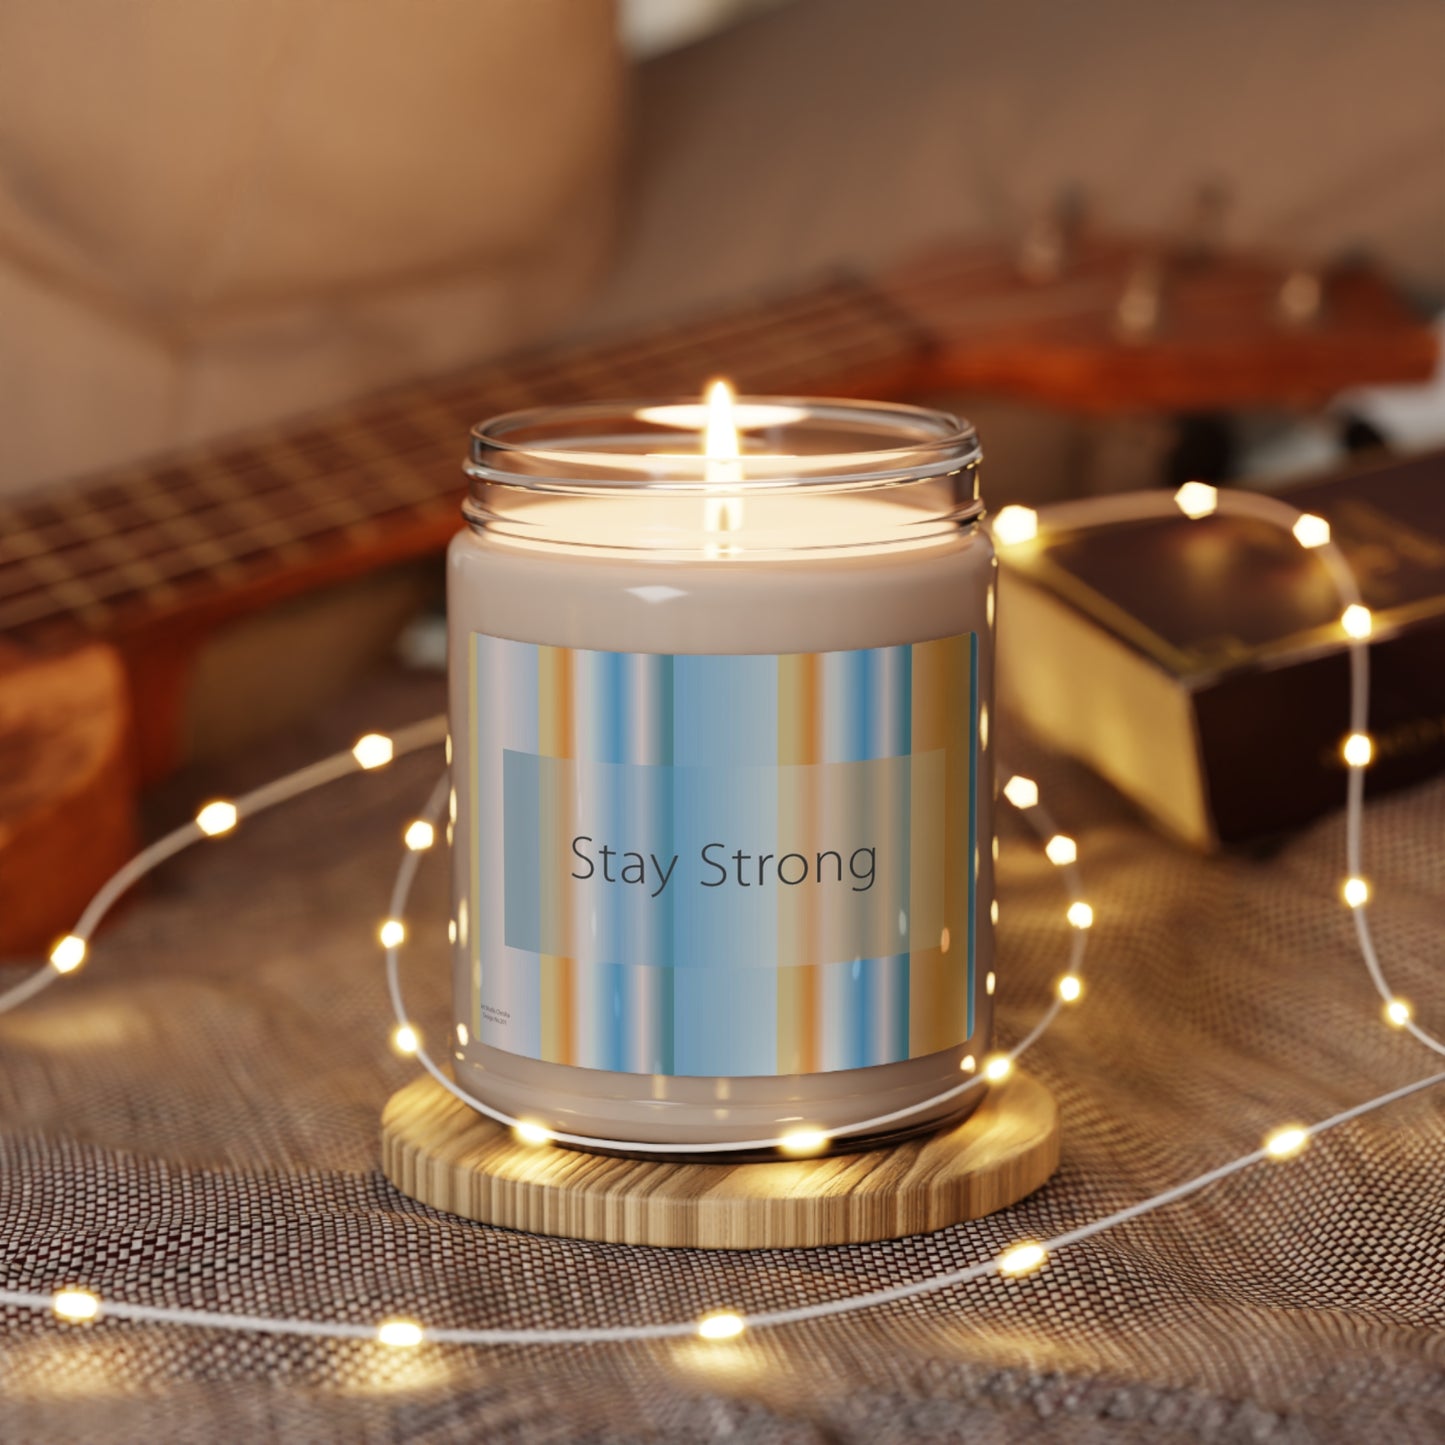 Scented Soy Candle, 9oz Stay Strong - Design No.201